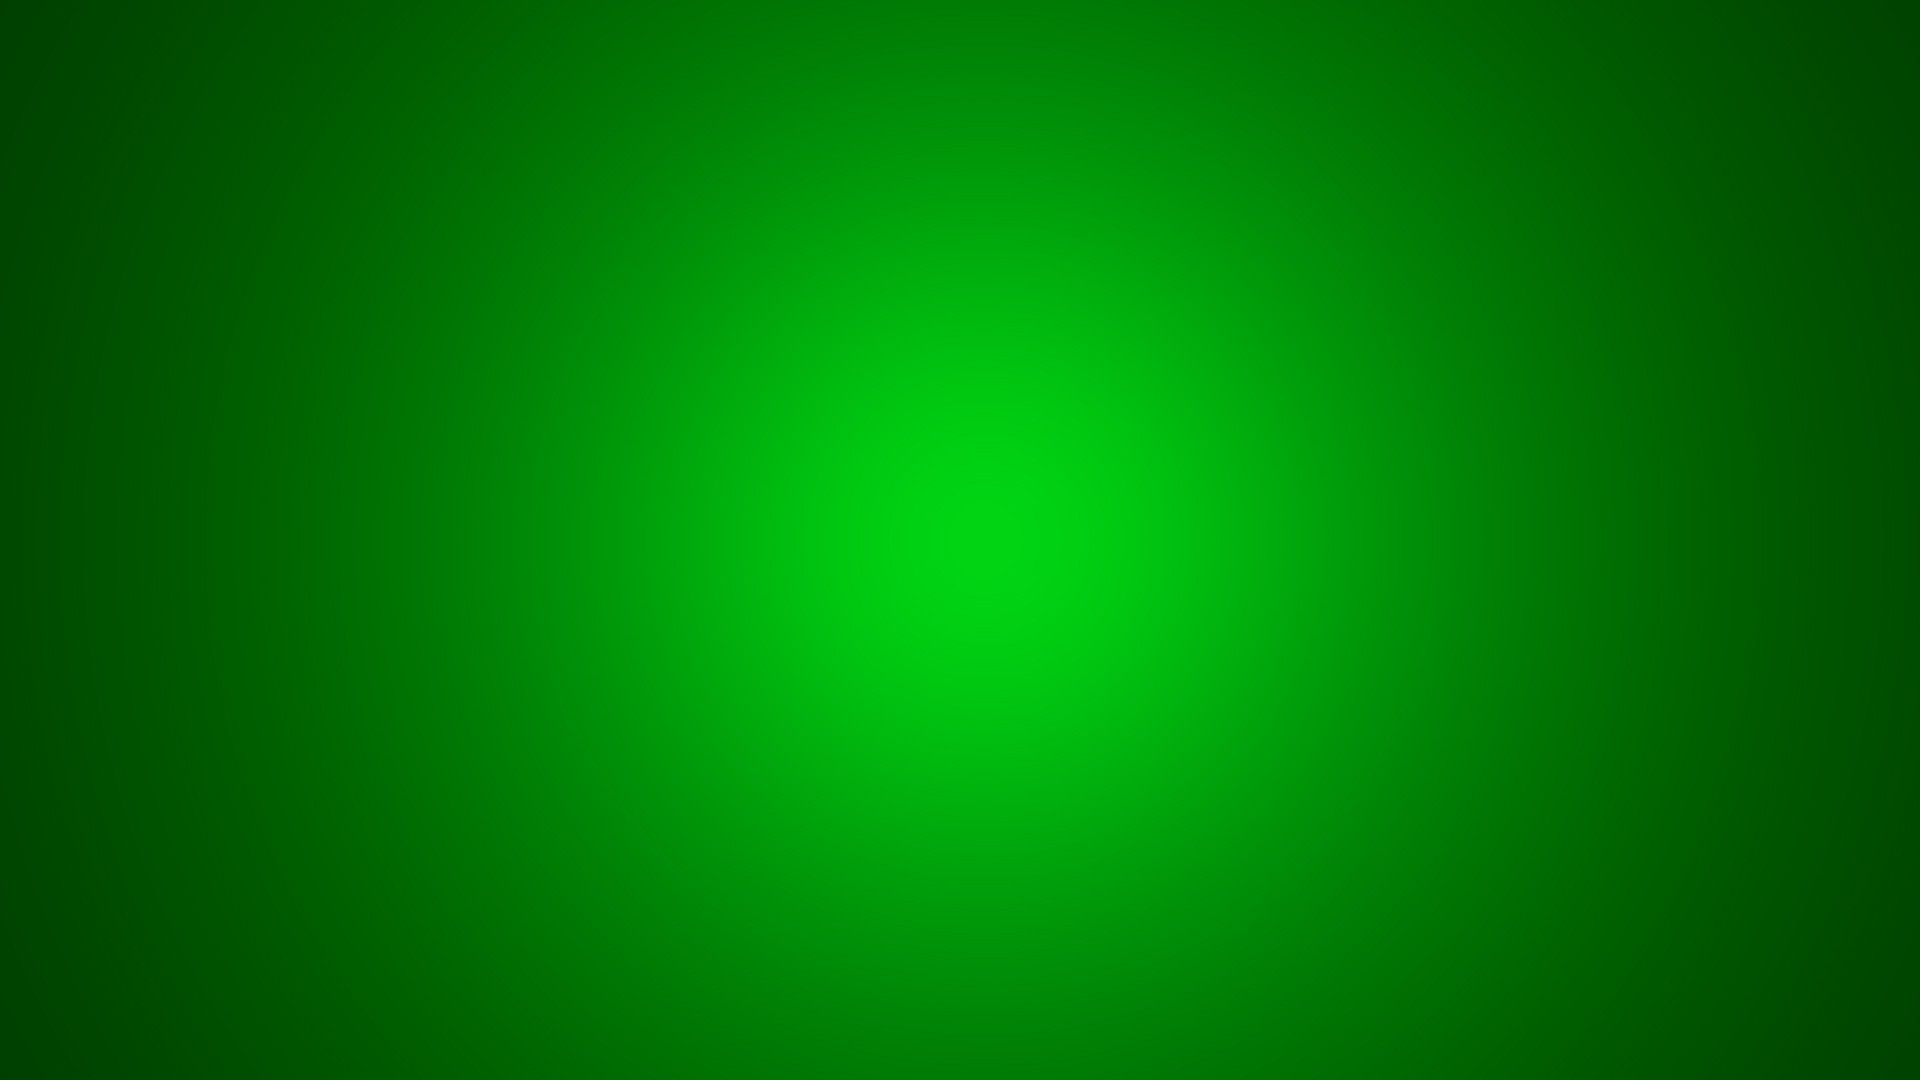 Green background image   All background for you